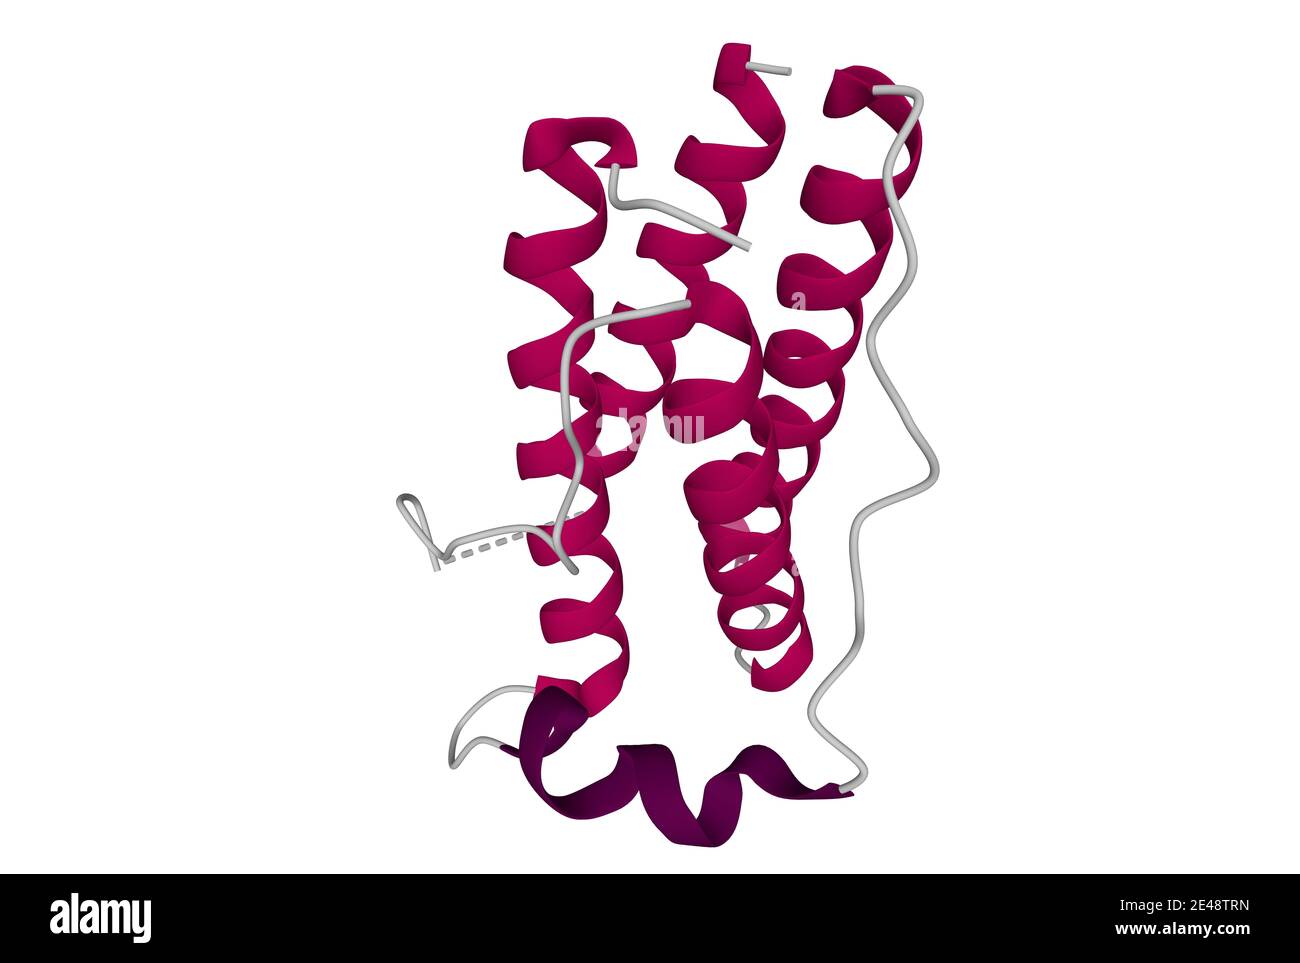 Structure of the human obesity protein, leptin. 3D cartoon model isolated, white background Stock Photo